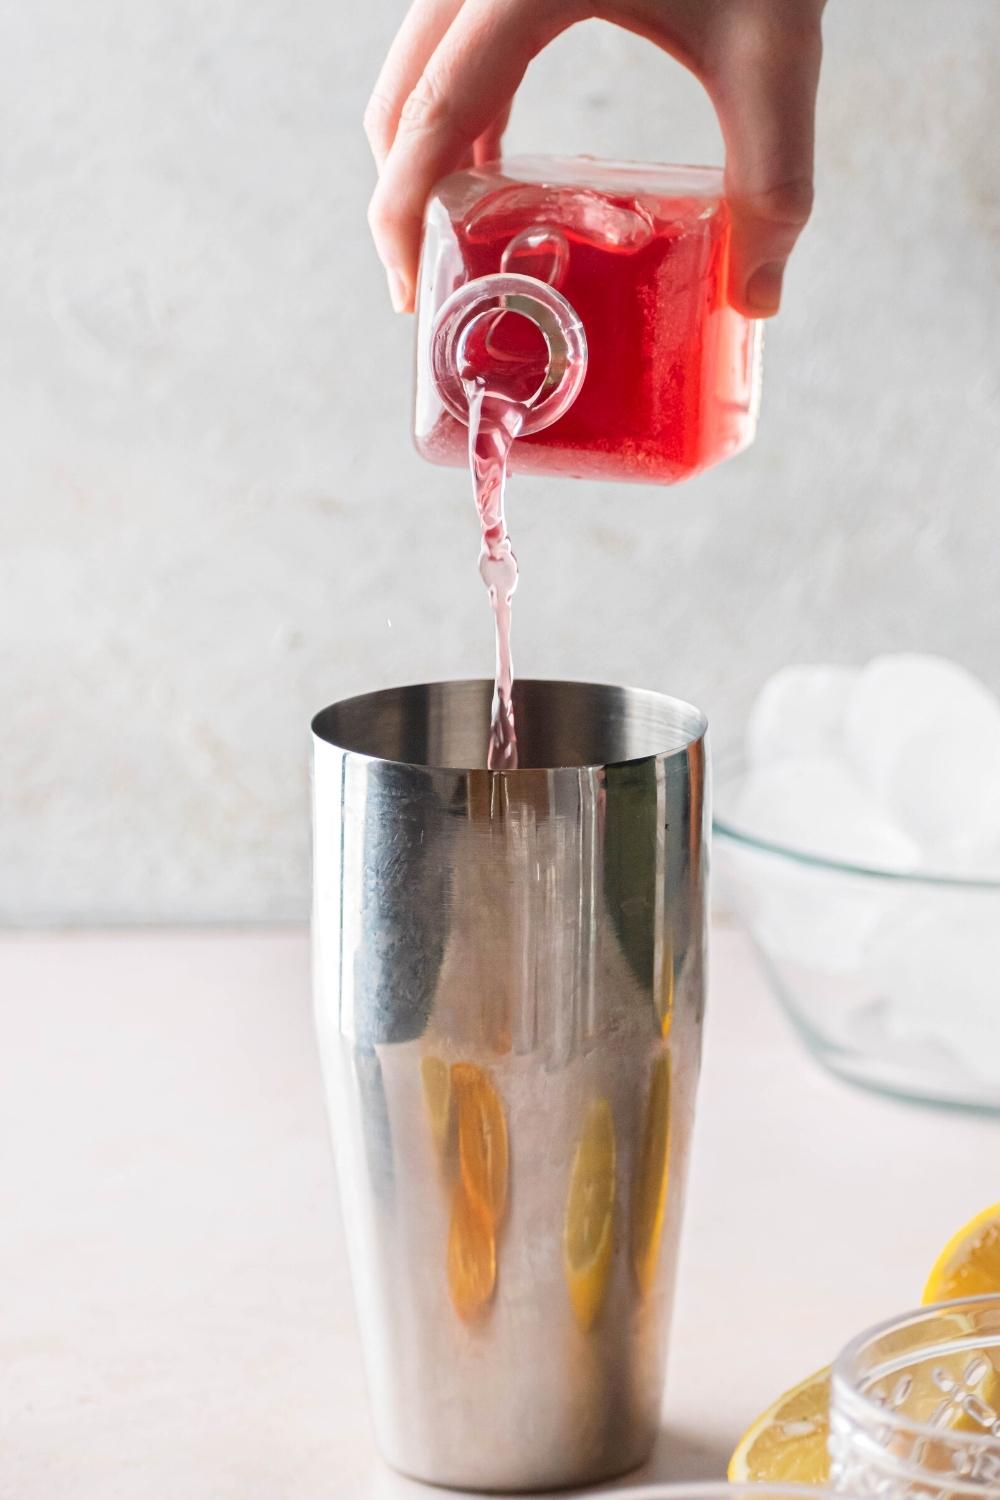 A hand pouring pink lemonade into a stainless steel mixing cup.